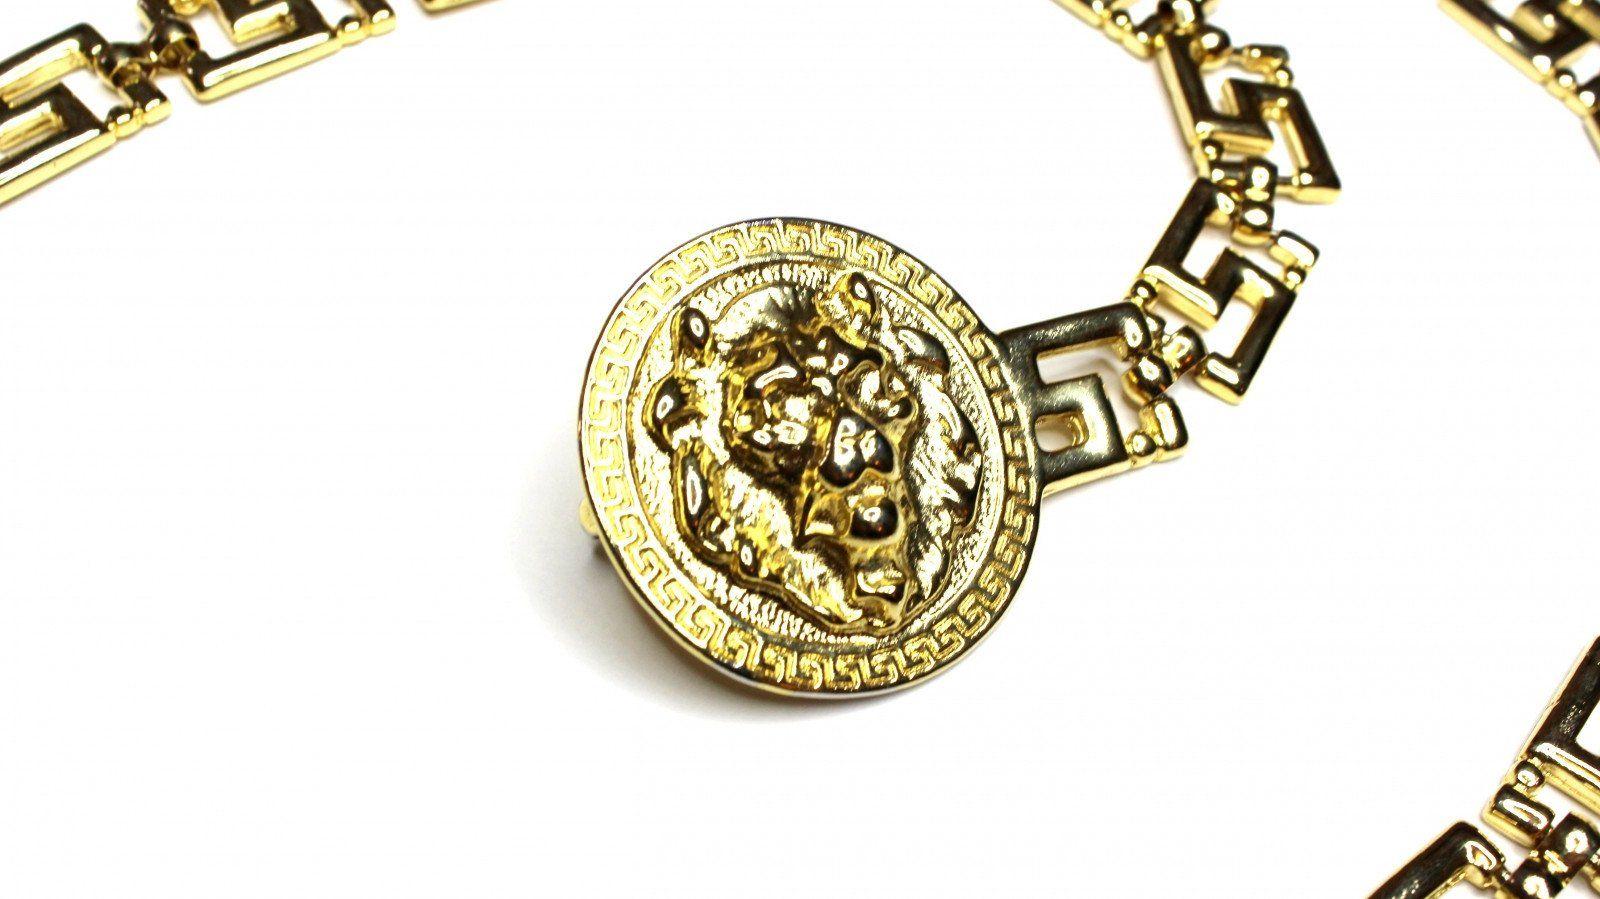 Versace with Lion Logo - Vintage Gianni Versace Lion Head and Greek Key